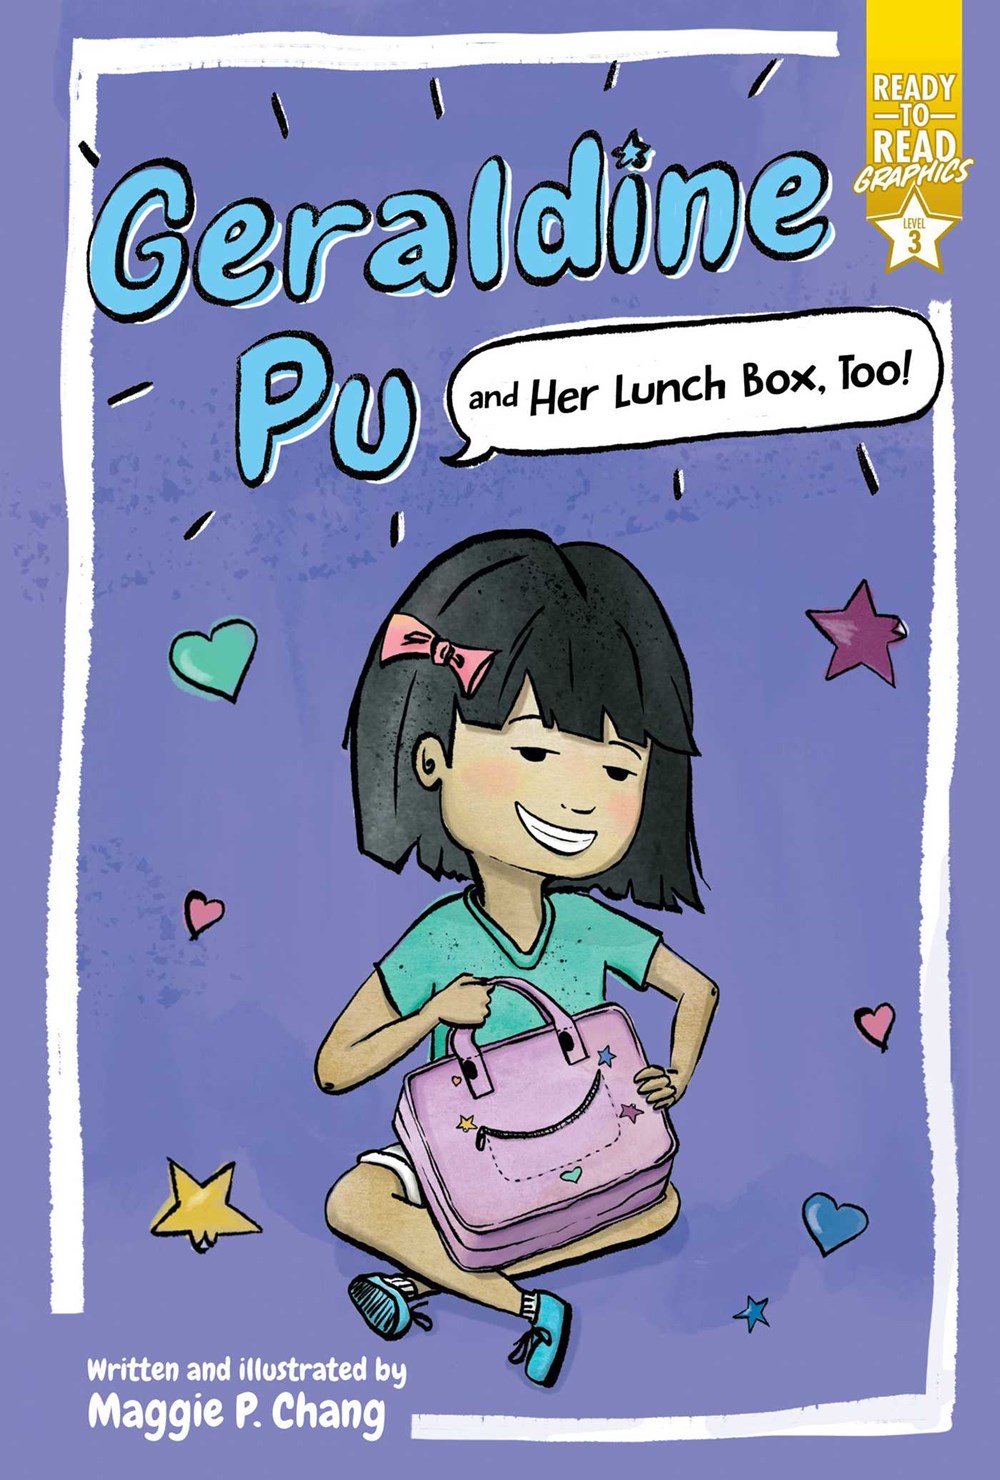 Geraldine Pu and Her Lunch Box, Too